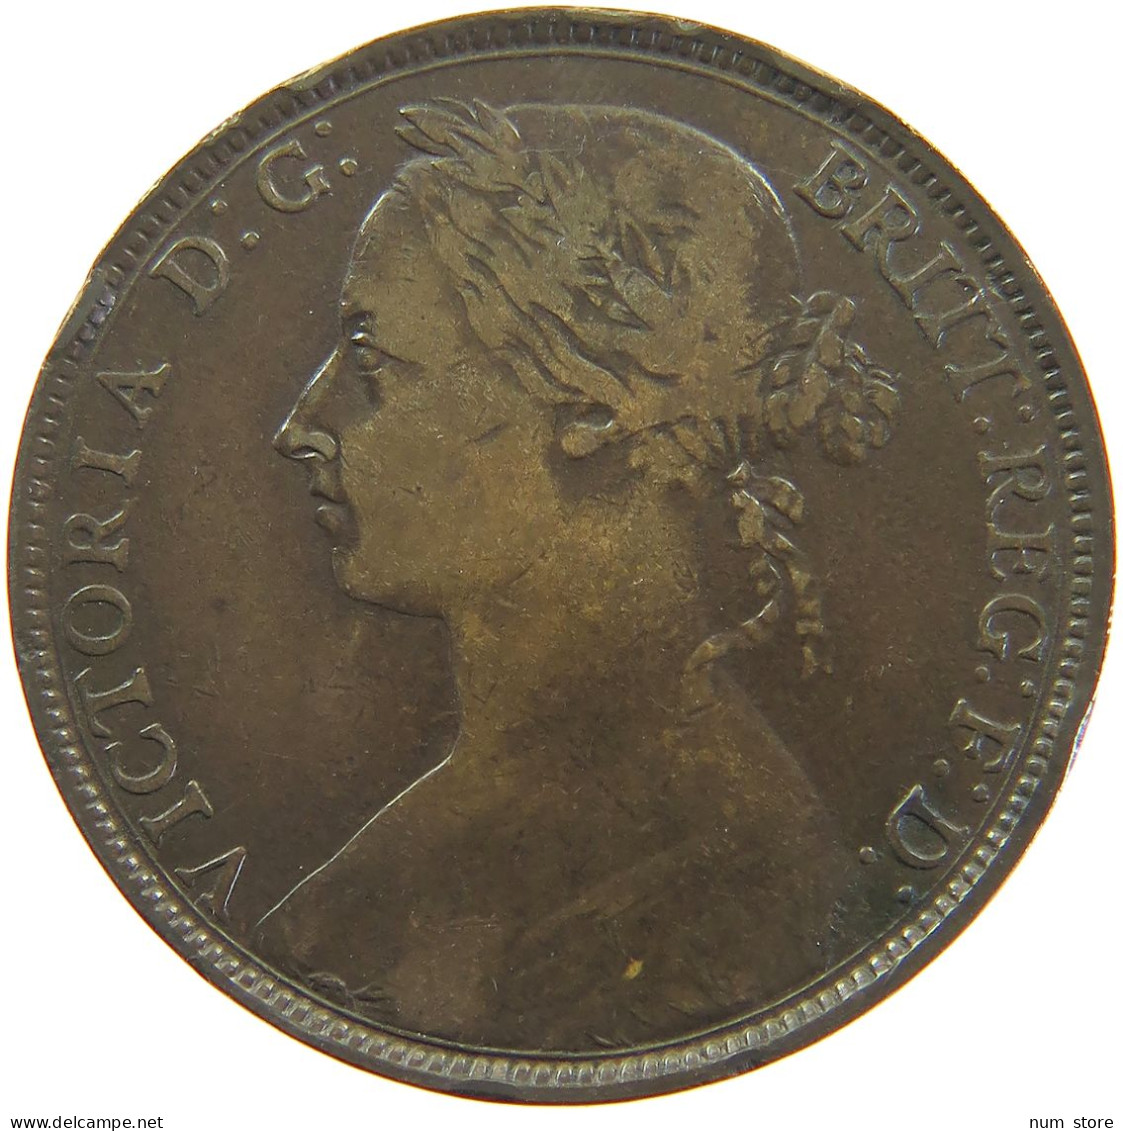 GREAT BRITAIN PENNY 1892 Victoria 1837-1901 #t020 0313 - D. 1 Penny